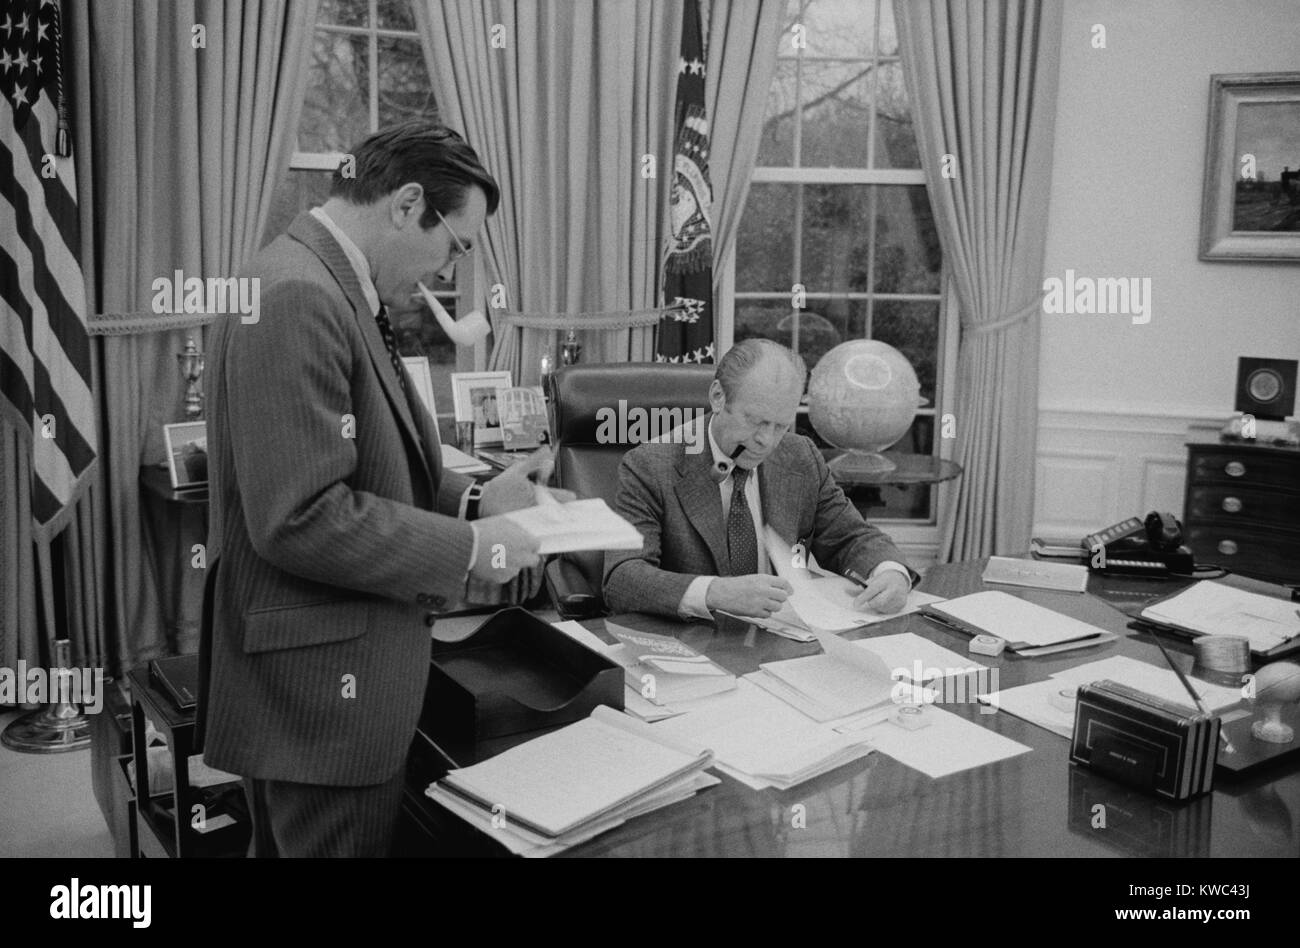 President Gerald Ford meeting with his Chief of Staff, Donald Rumsfeld. Feb. 6, 1975. (BSLOC 2015 14 59) Stock Photo